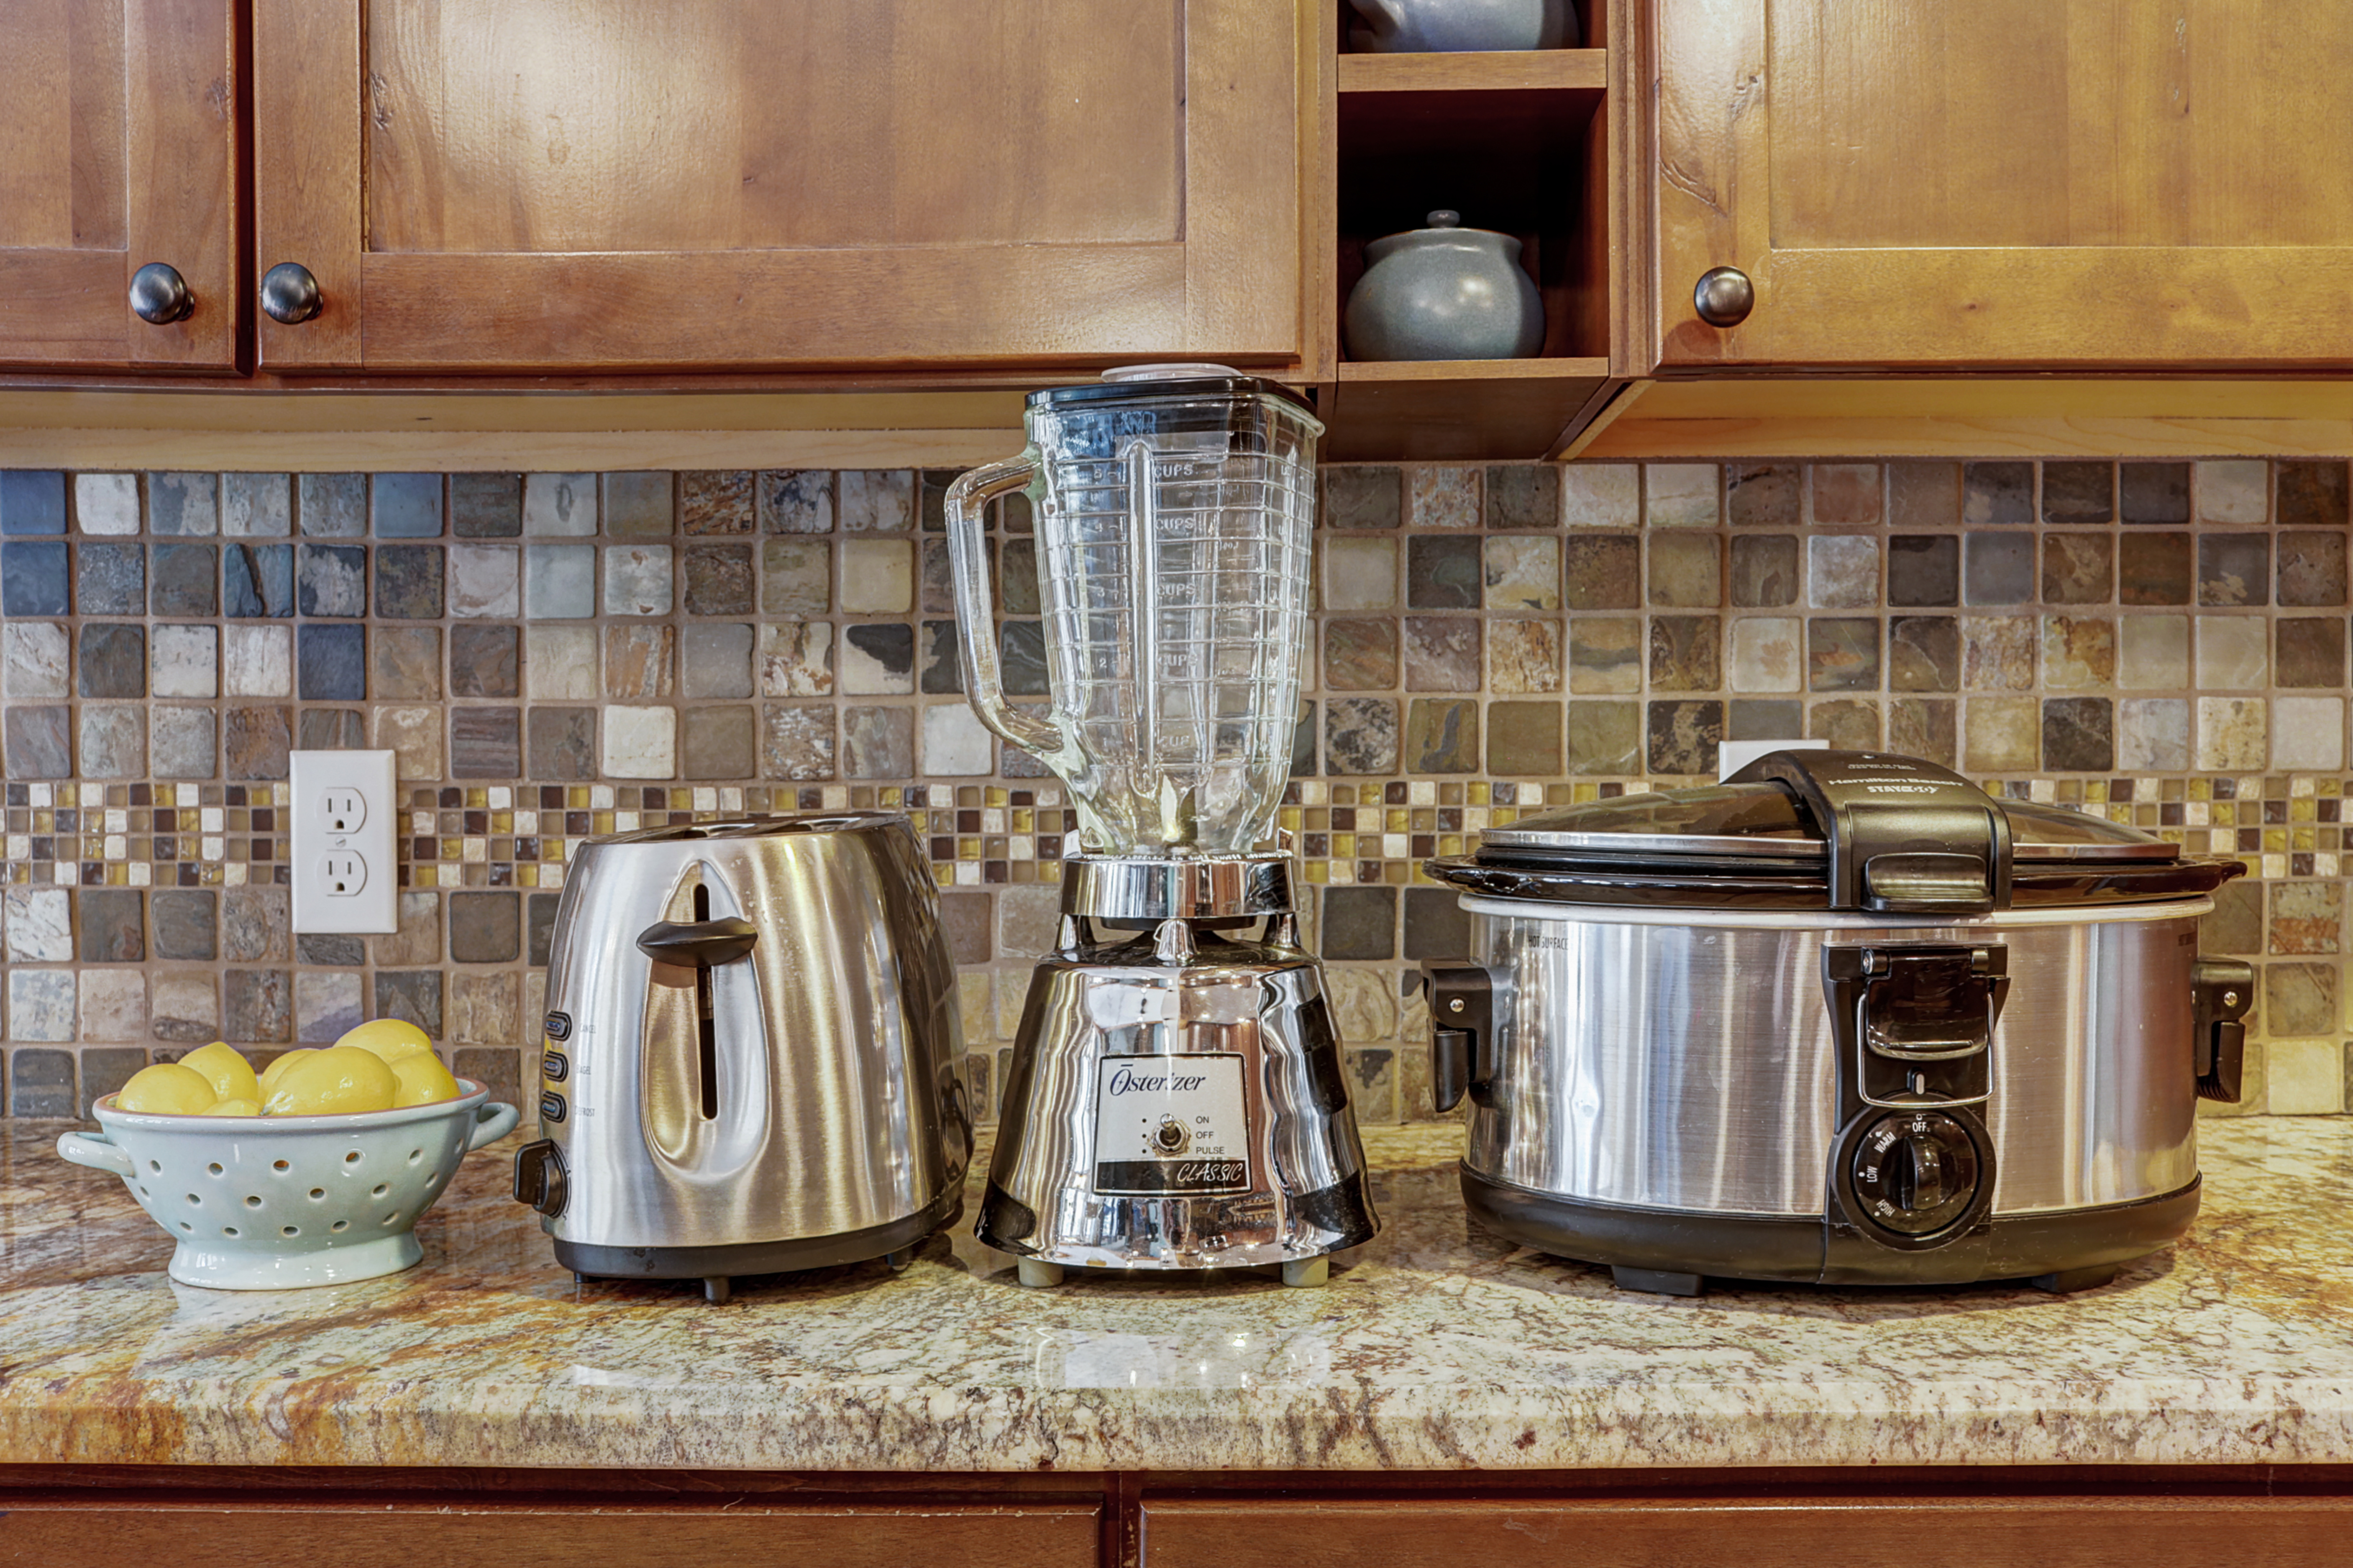 10 cup coffee maker, toaster and slow-cooker provided in the kitchen - 4 O’Clock Lodge D26 Breckenridge Vacation Rental